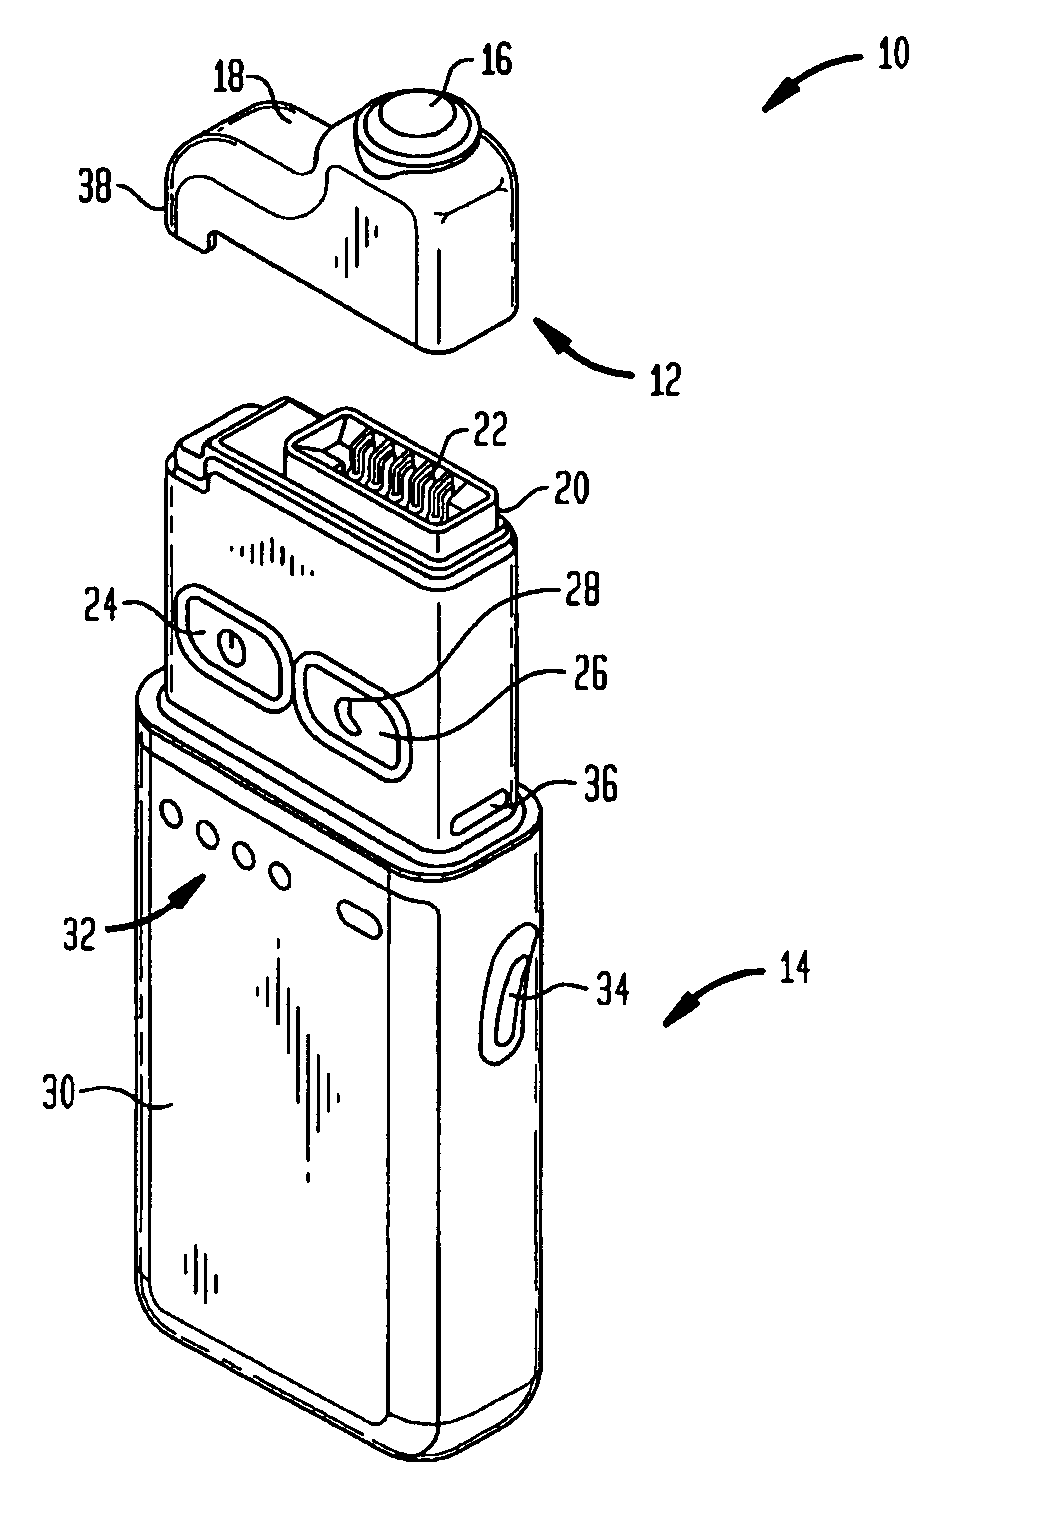 Treatment device and method for treating skin lesions through application of heat